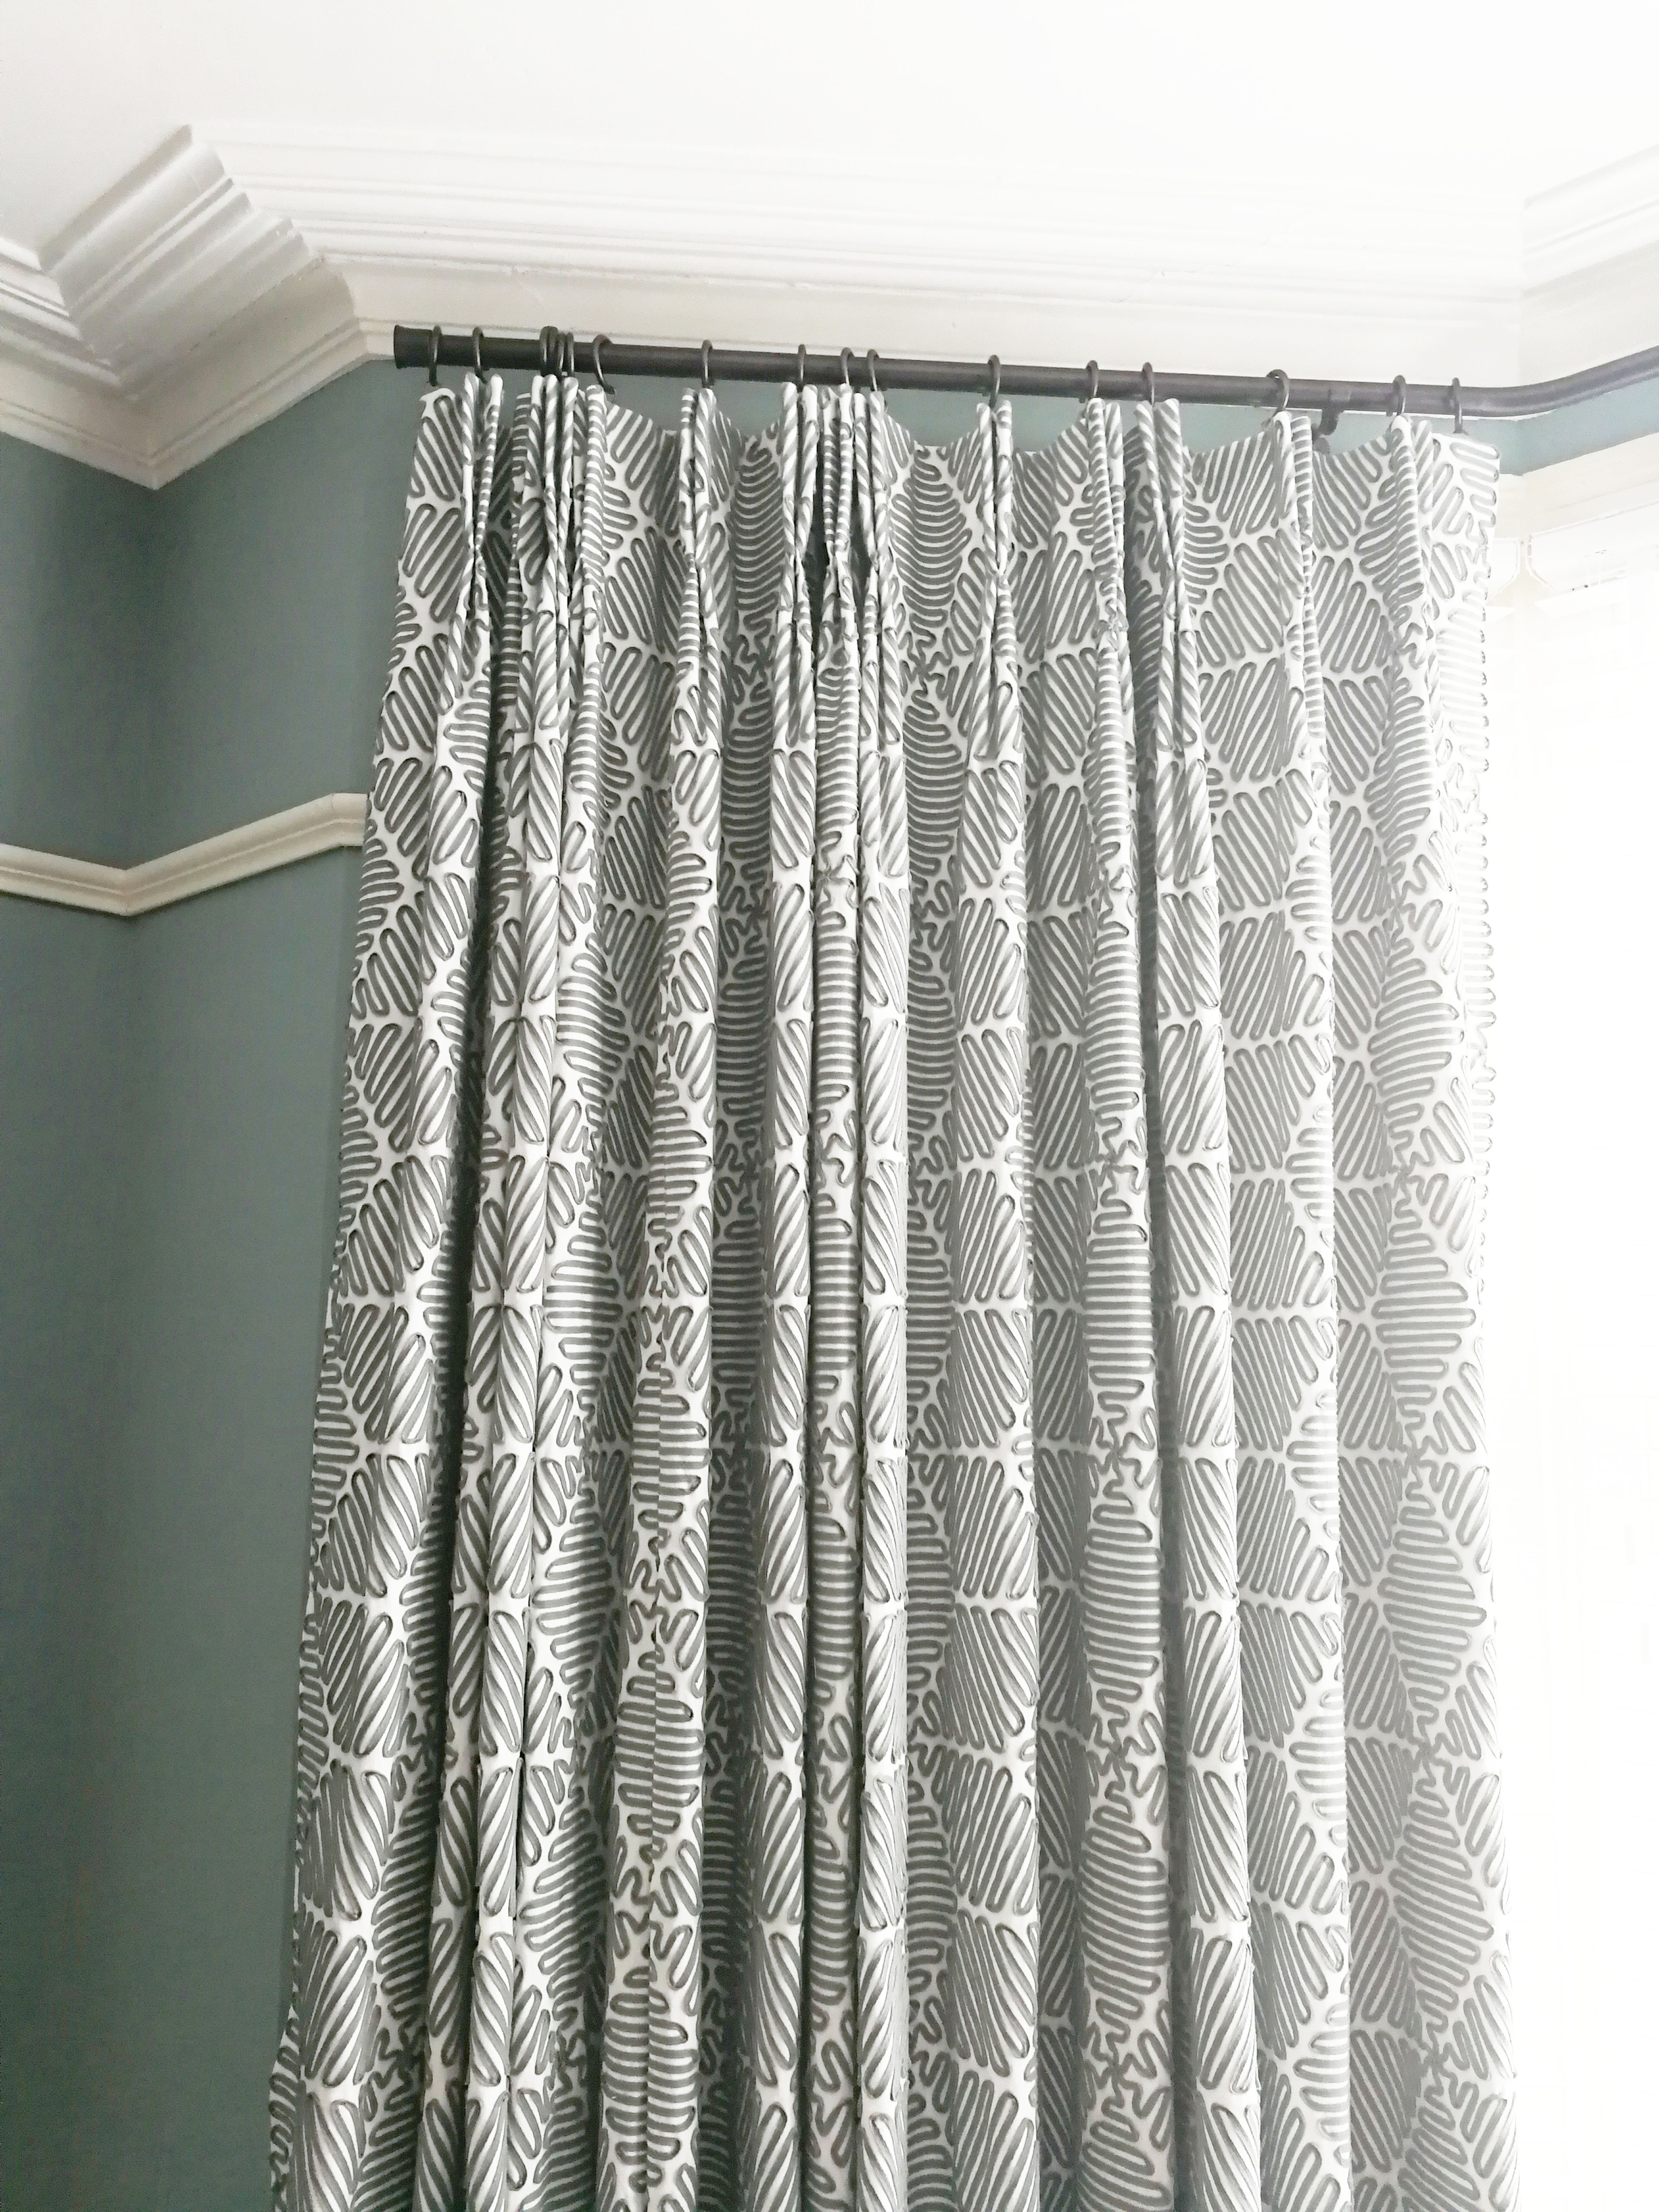 A photo of the curtains with their pleats or folds in place.